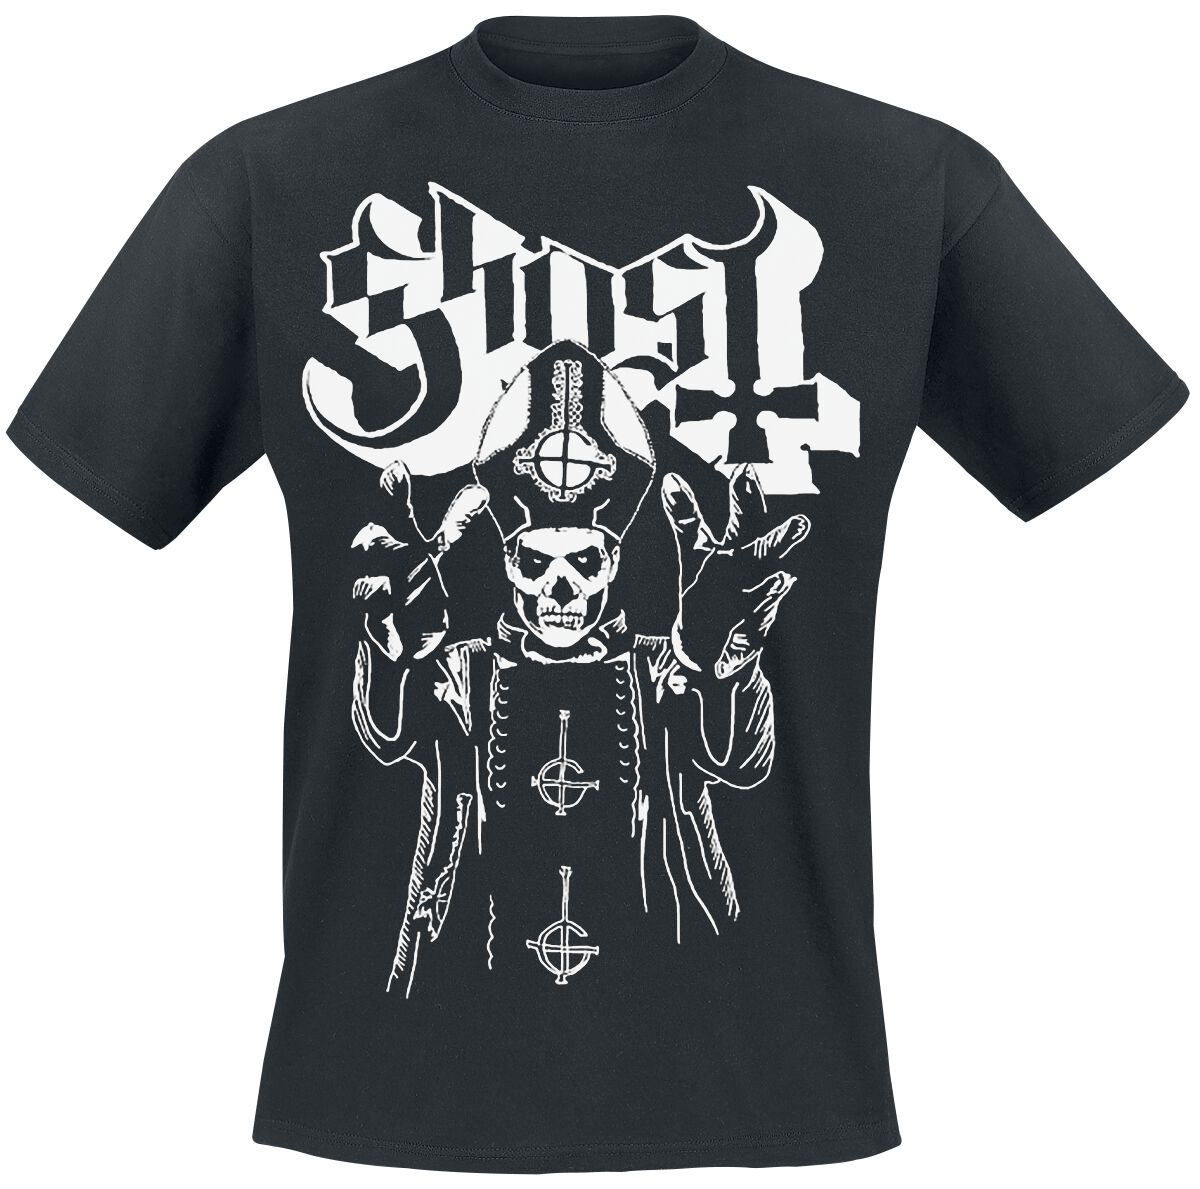 Image of T-Shirt di Ghost - Pope's Wrath - S a 4XL - Uomo - nero